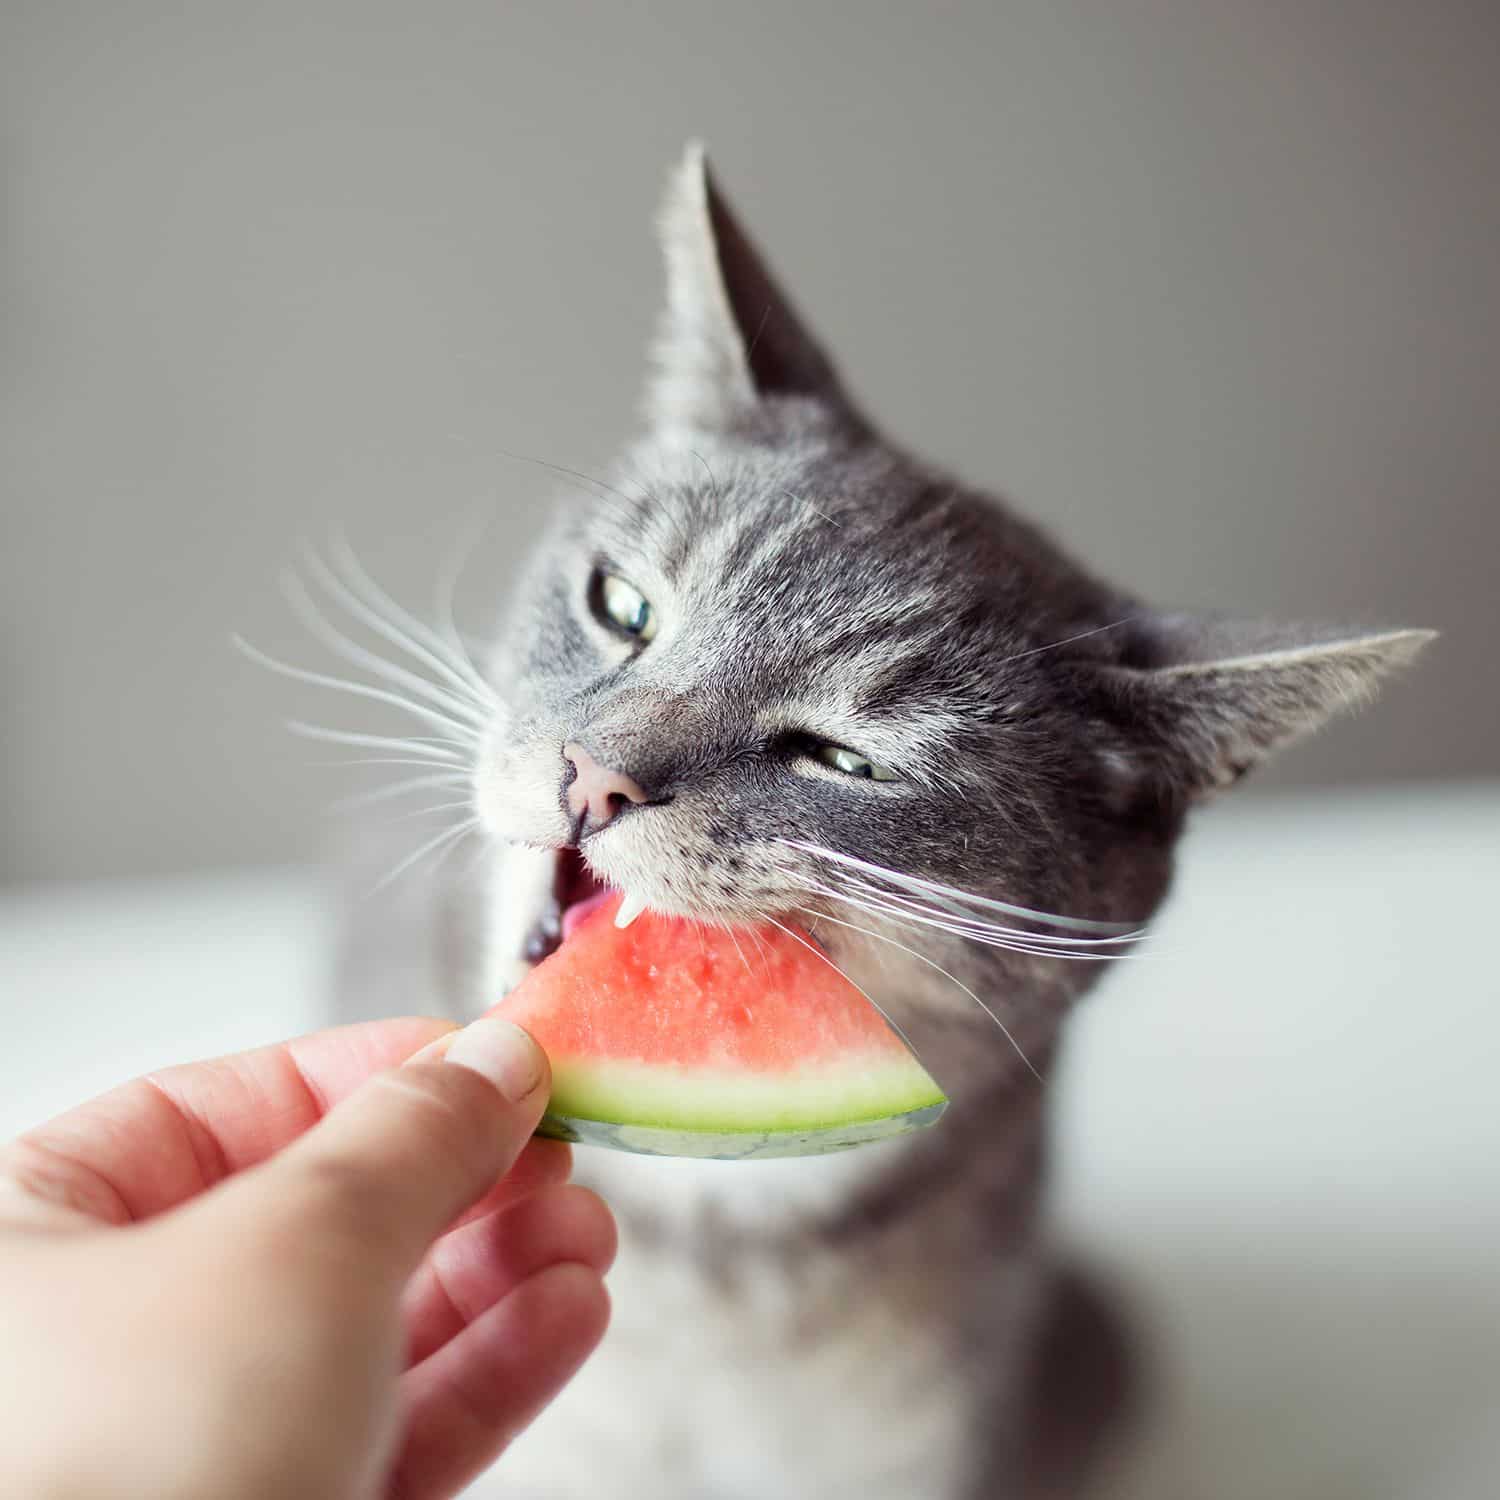 Eight Human Foods That Your Cat Can Safely Eat